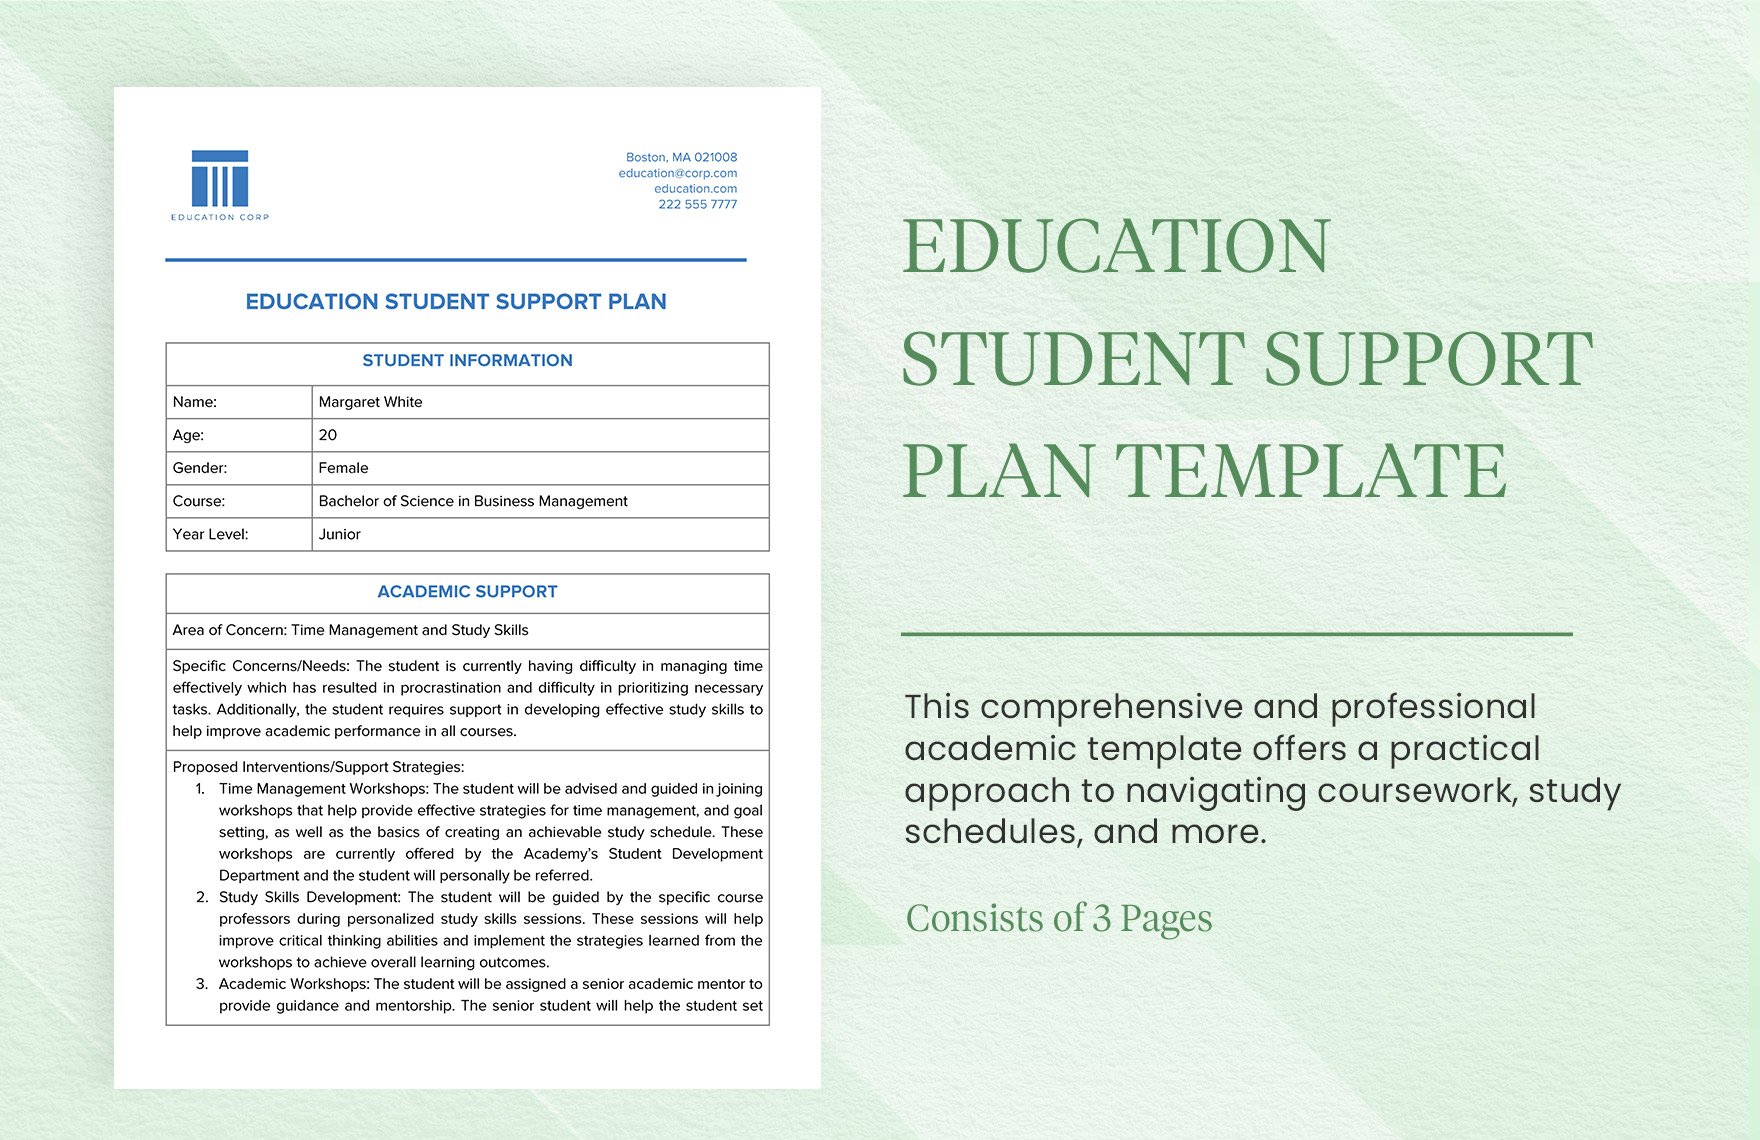 Education Student Support Plan Template Download in Word, Google Docs